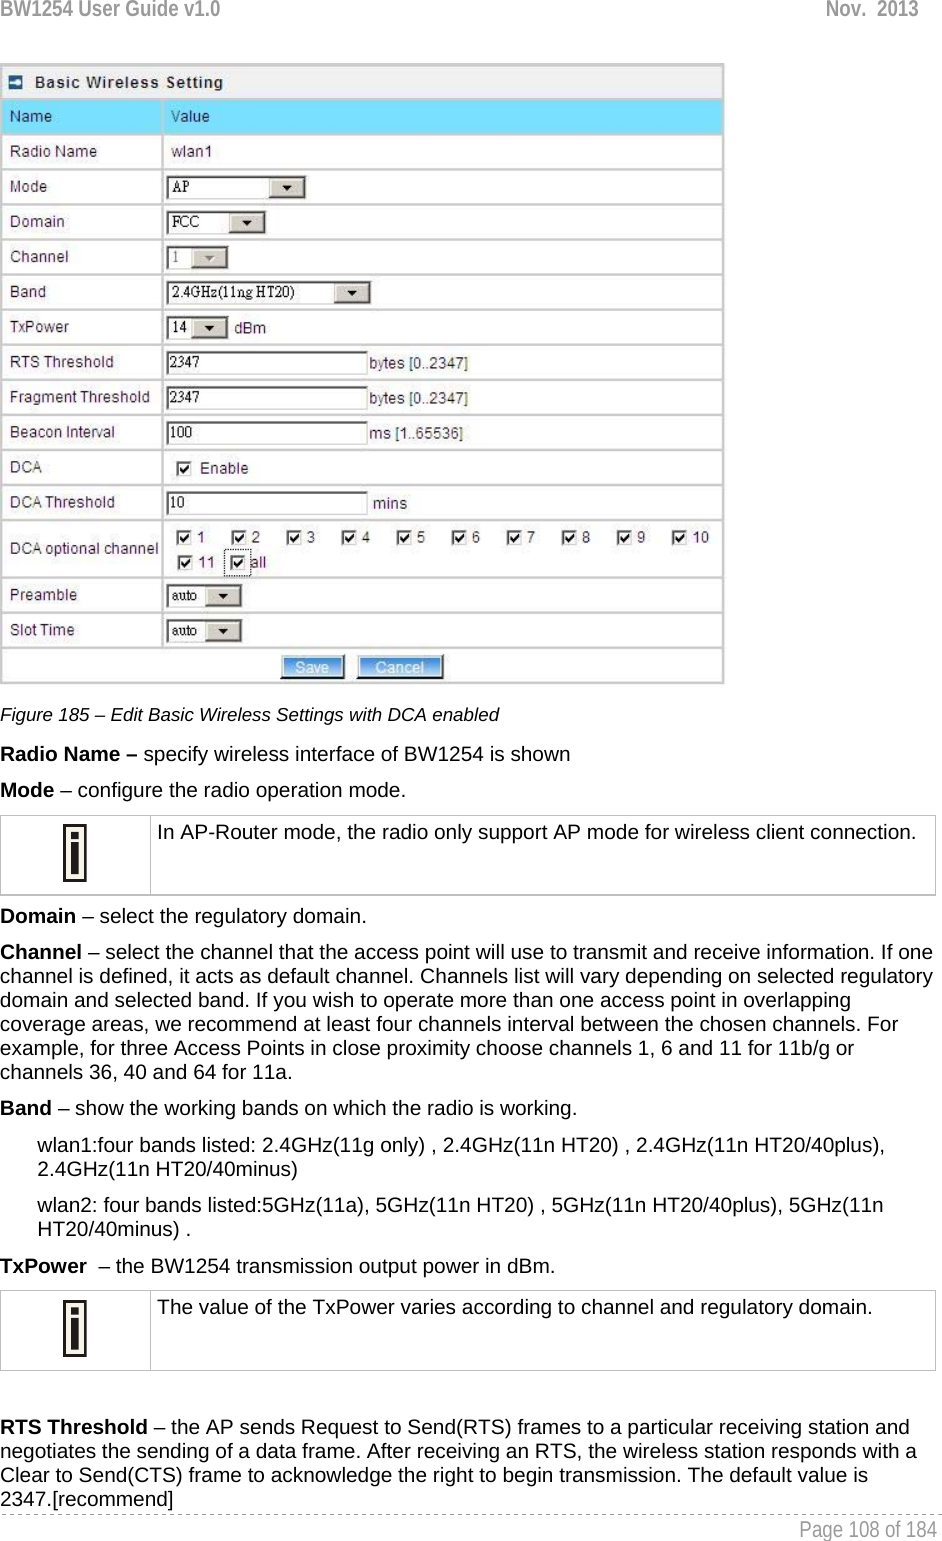 BW1254 User Guide v1.0  Nov.  2013     Page 108 of 184    Figure 185 – Edit Basic Wireless Settings with DCA enabled Radio Name – specify wireless interface of BW1254 is shown Mode – configure the radio operation mode.   In AP-Router mode, the radio only support AP mode for wireless client connection.Domain – select the regulatory domain. Channel – select the channel that the access point will use to transmit and receive information. If one channel is defined, it acts as default channel. Channels list will vary depending on selected regulatory domain and selected band. If you wish to operate more than one access point in overlapping coverage areas, we recommend at least four channels interval between the chosen channels. For example, for three Access Points in close proximity choose channels 1, 6 and 11 for 11b/g or channels 36, 40 and 64 for 11a.  Band – show the working bands on which the radio is working.  wlan1:four bands listed: 2.4GHz(11g only) , 2.4GHz(11n HT20) , 2.4GHz(11n HT20/40plus), 2.4GHz(11n HT20/40minus)  wlan2: four bands listed:5GHz(11a), 5GHz(11n HT20) , 5GHz(11n HT20/40plus), 5GHz(11n HT20/40minus) . TxPower  – the BW1254 transmission output power in dBm.   The value of the TxPower varies according to channel and regulatory domain.  RTS Threshold – the AP sends Request to Send(RTS) frames to a particular receiving station and negotiates the sending of a data frame. After receiving an RTS, the wireless station responds with a Clear to Send(CTS) frame to acknowledge the right to begin transmission. The default value is 2347.[recommend] 